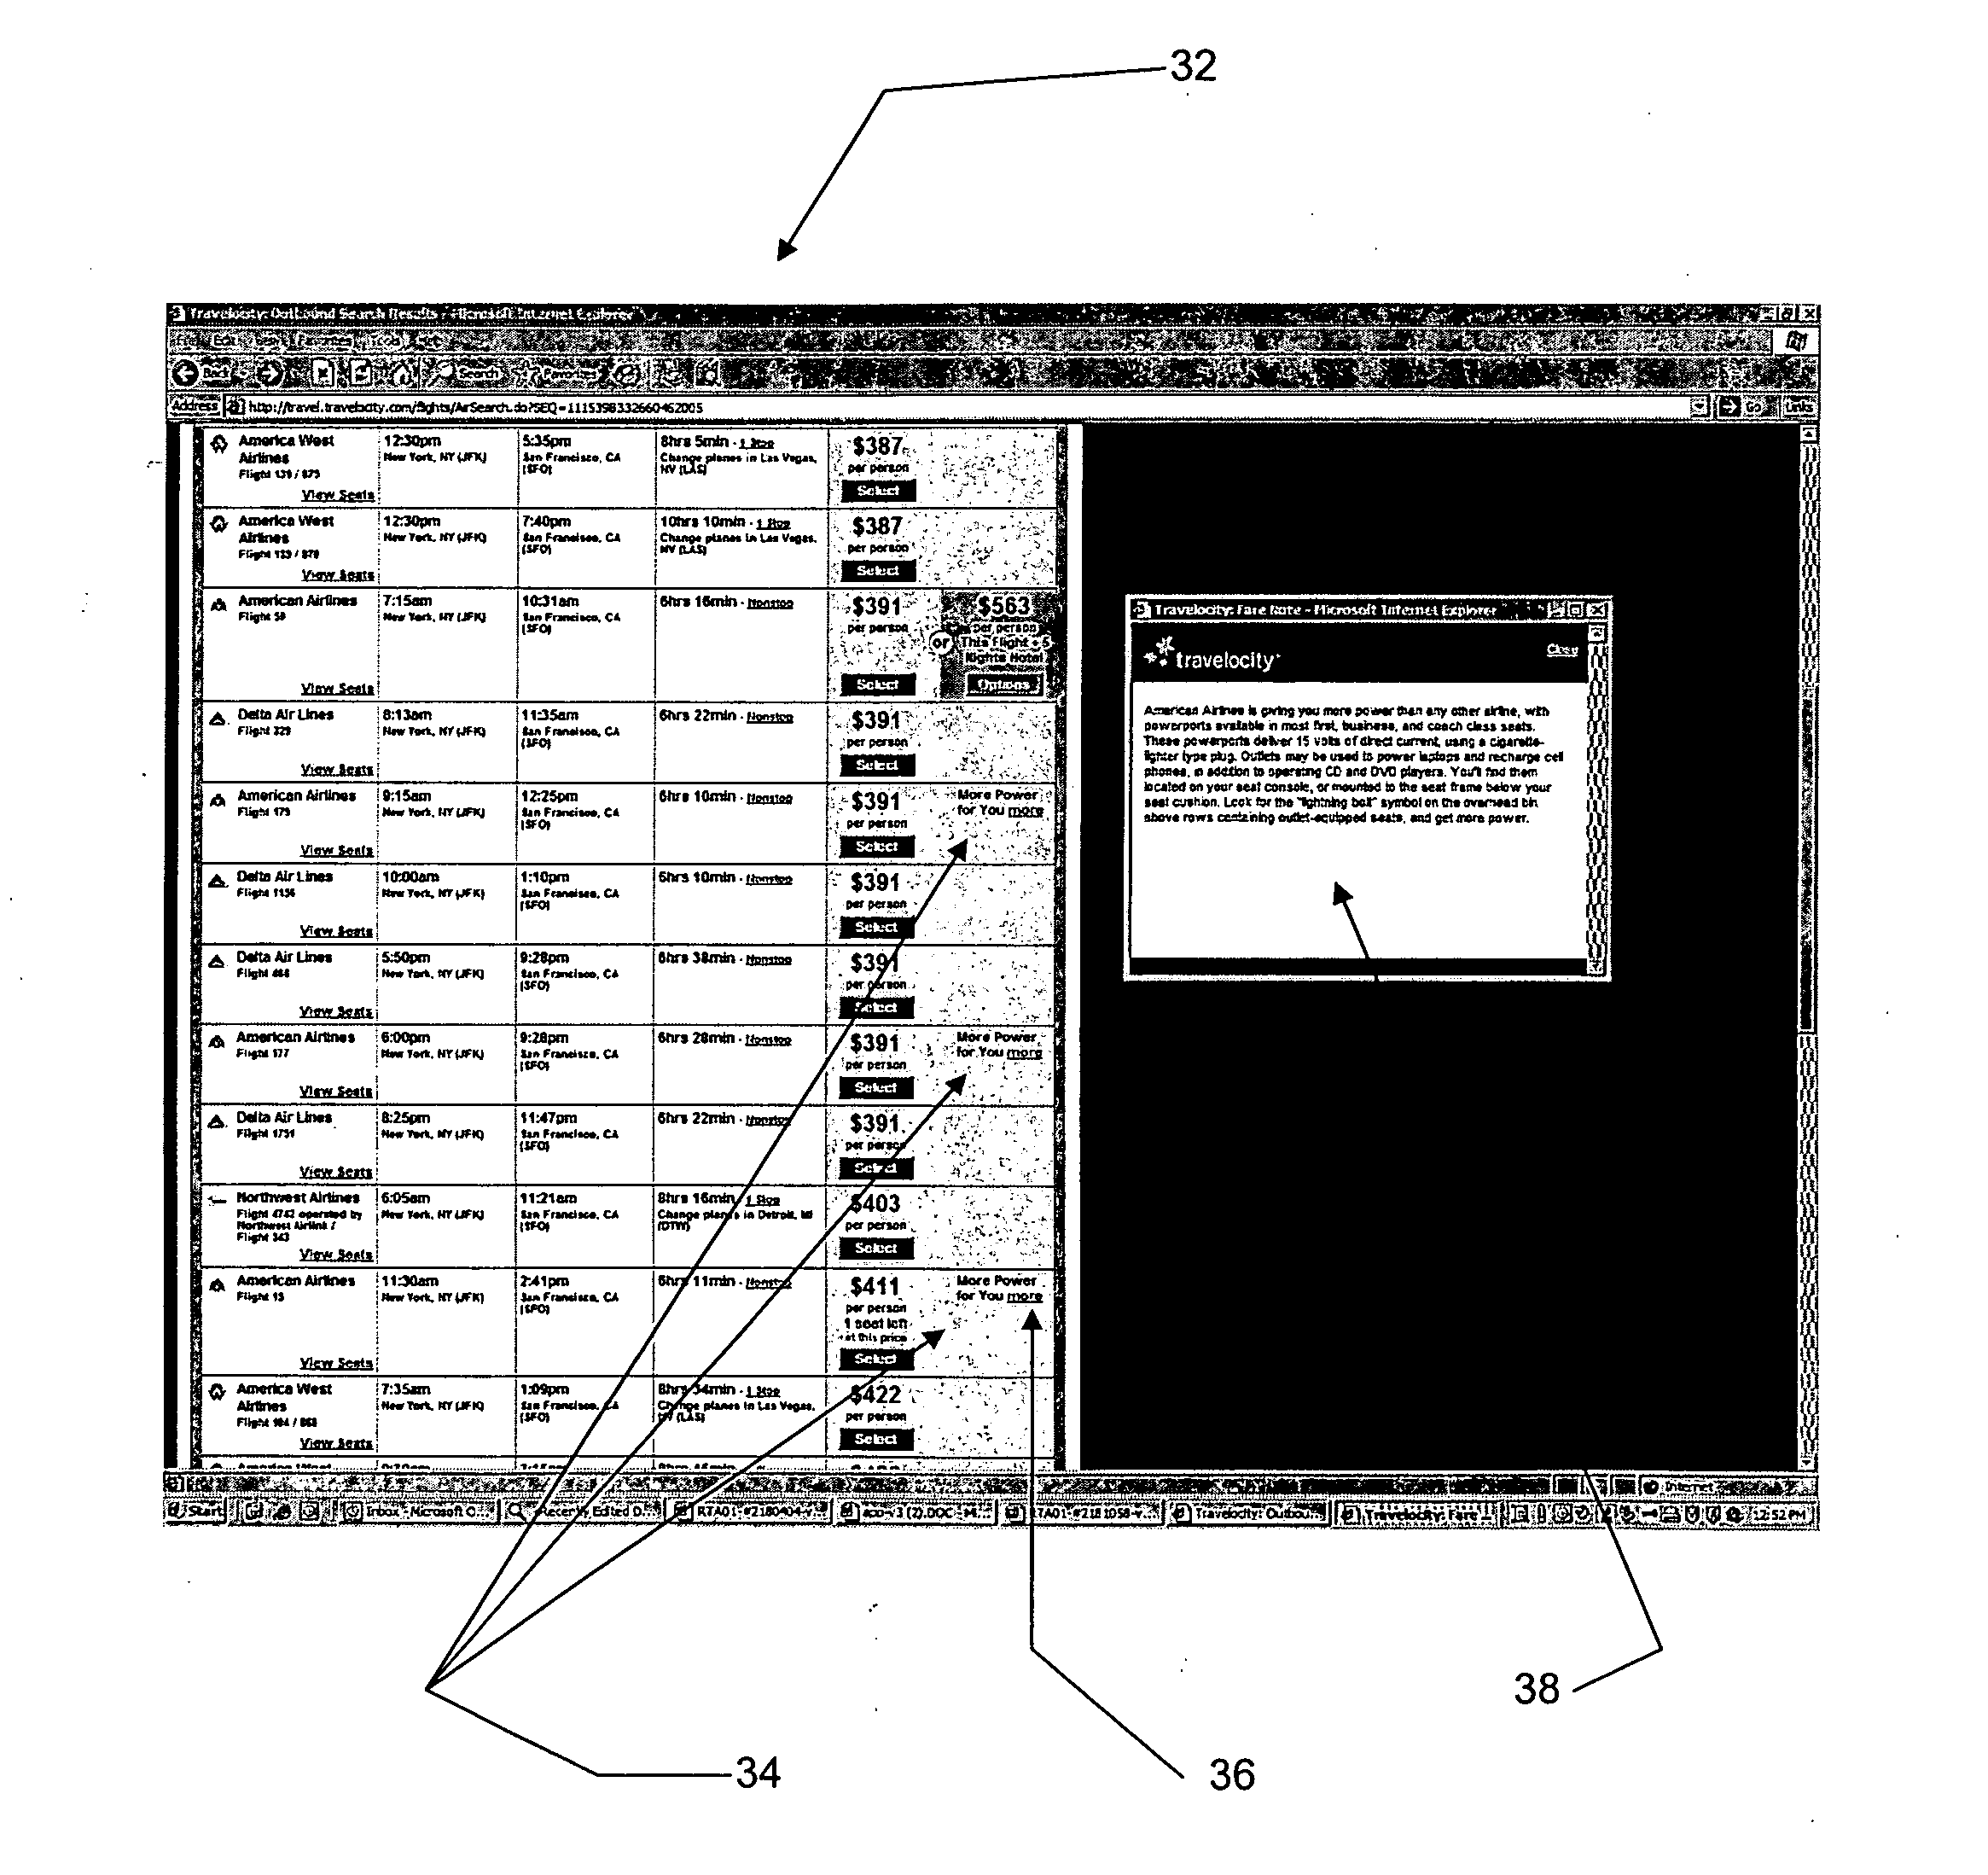 System, method, and computer program product for reducing the burden on an inventory system by retrieving, translating, and displaying attributes information corresponding to travel itineraries listed in the inventory system